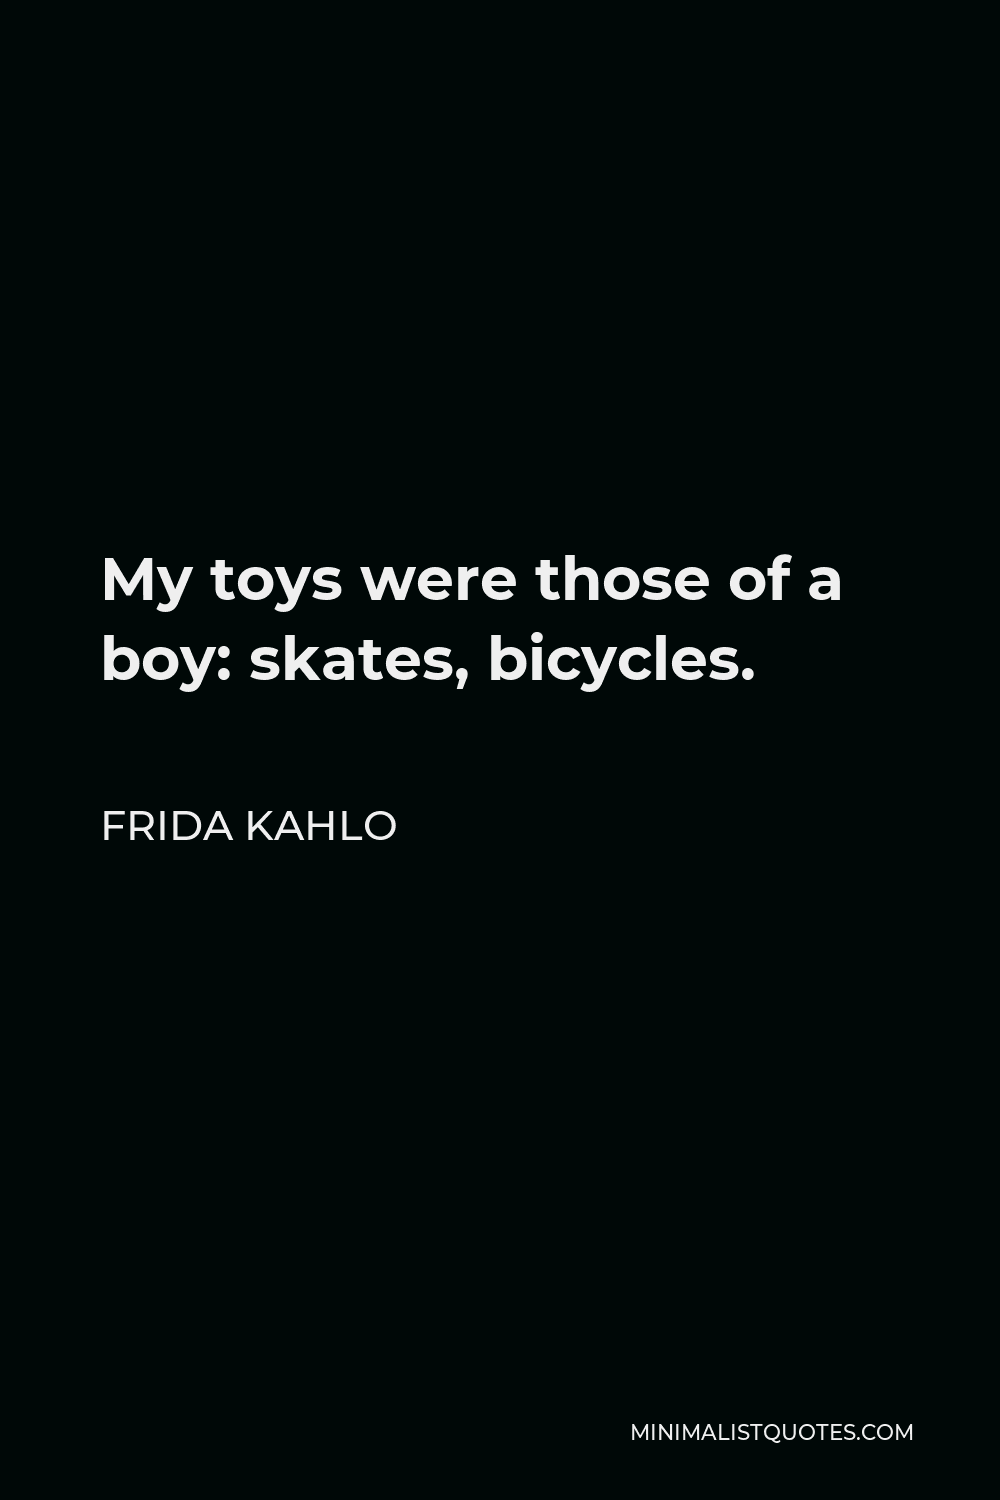 Frida Kahlo Quote - My toys were those of a boy: skates, bicycles.